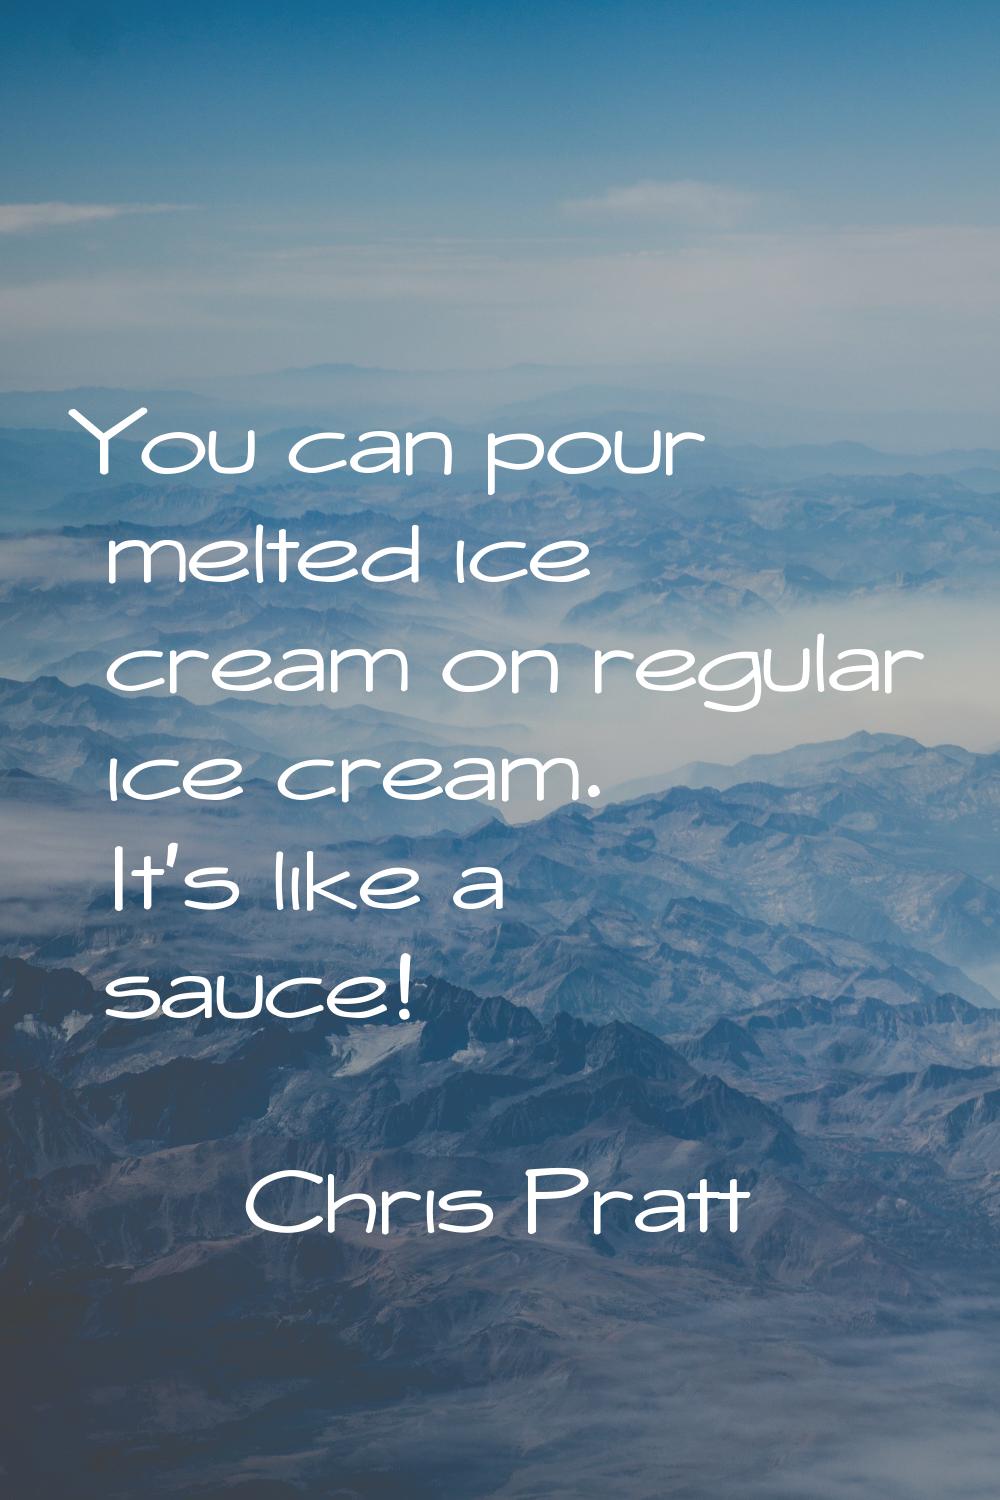 You can pour melted ice cream on regular ice cream. It's like a sauce!